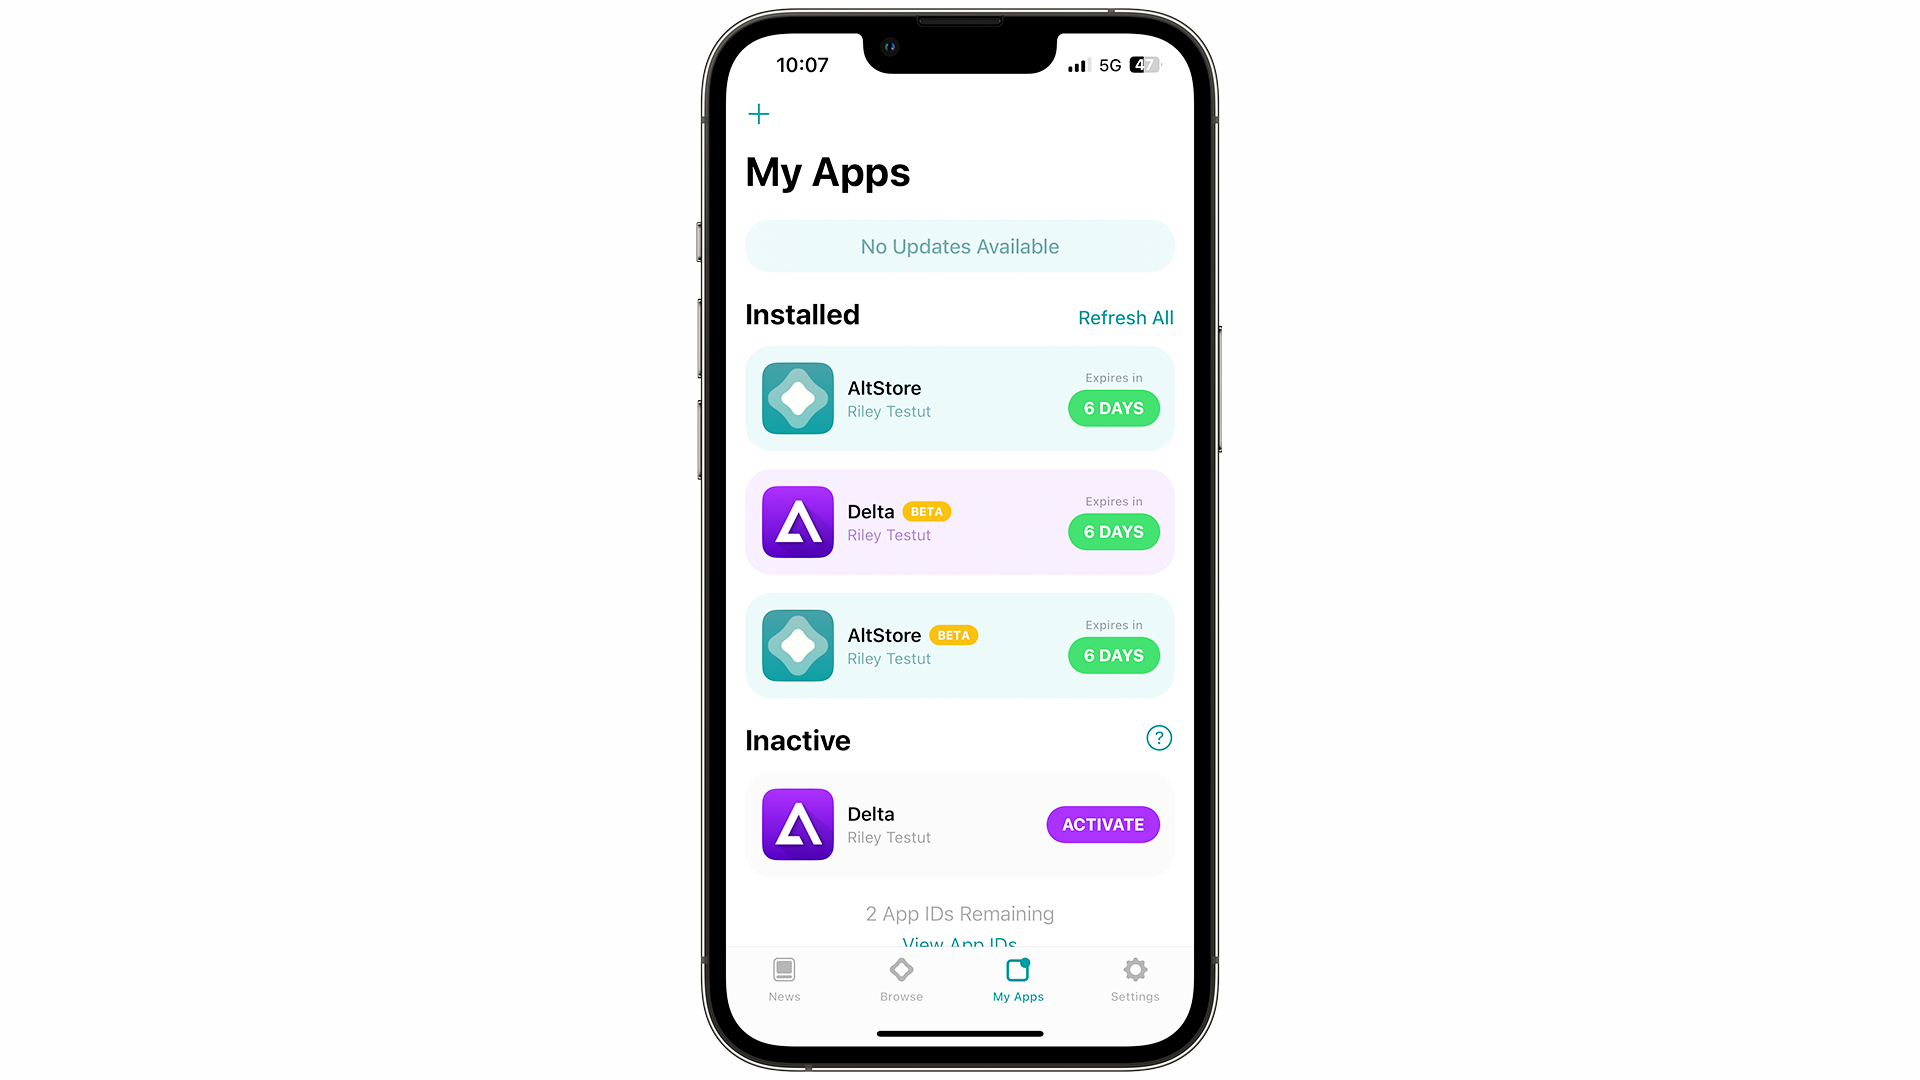 Alt Store, a popular third-party app store, is now available to download on iPhones in the EU